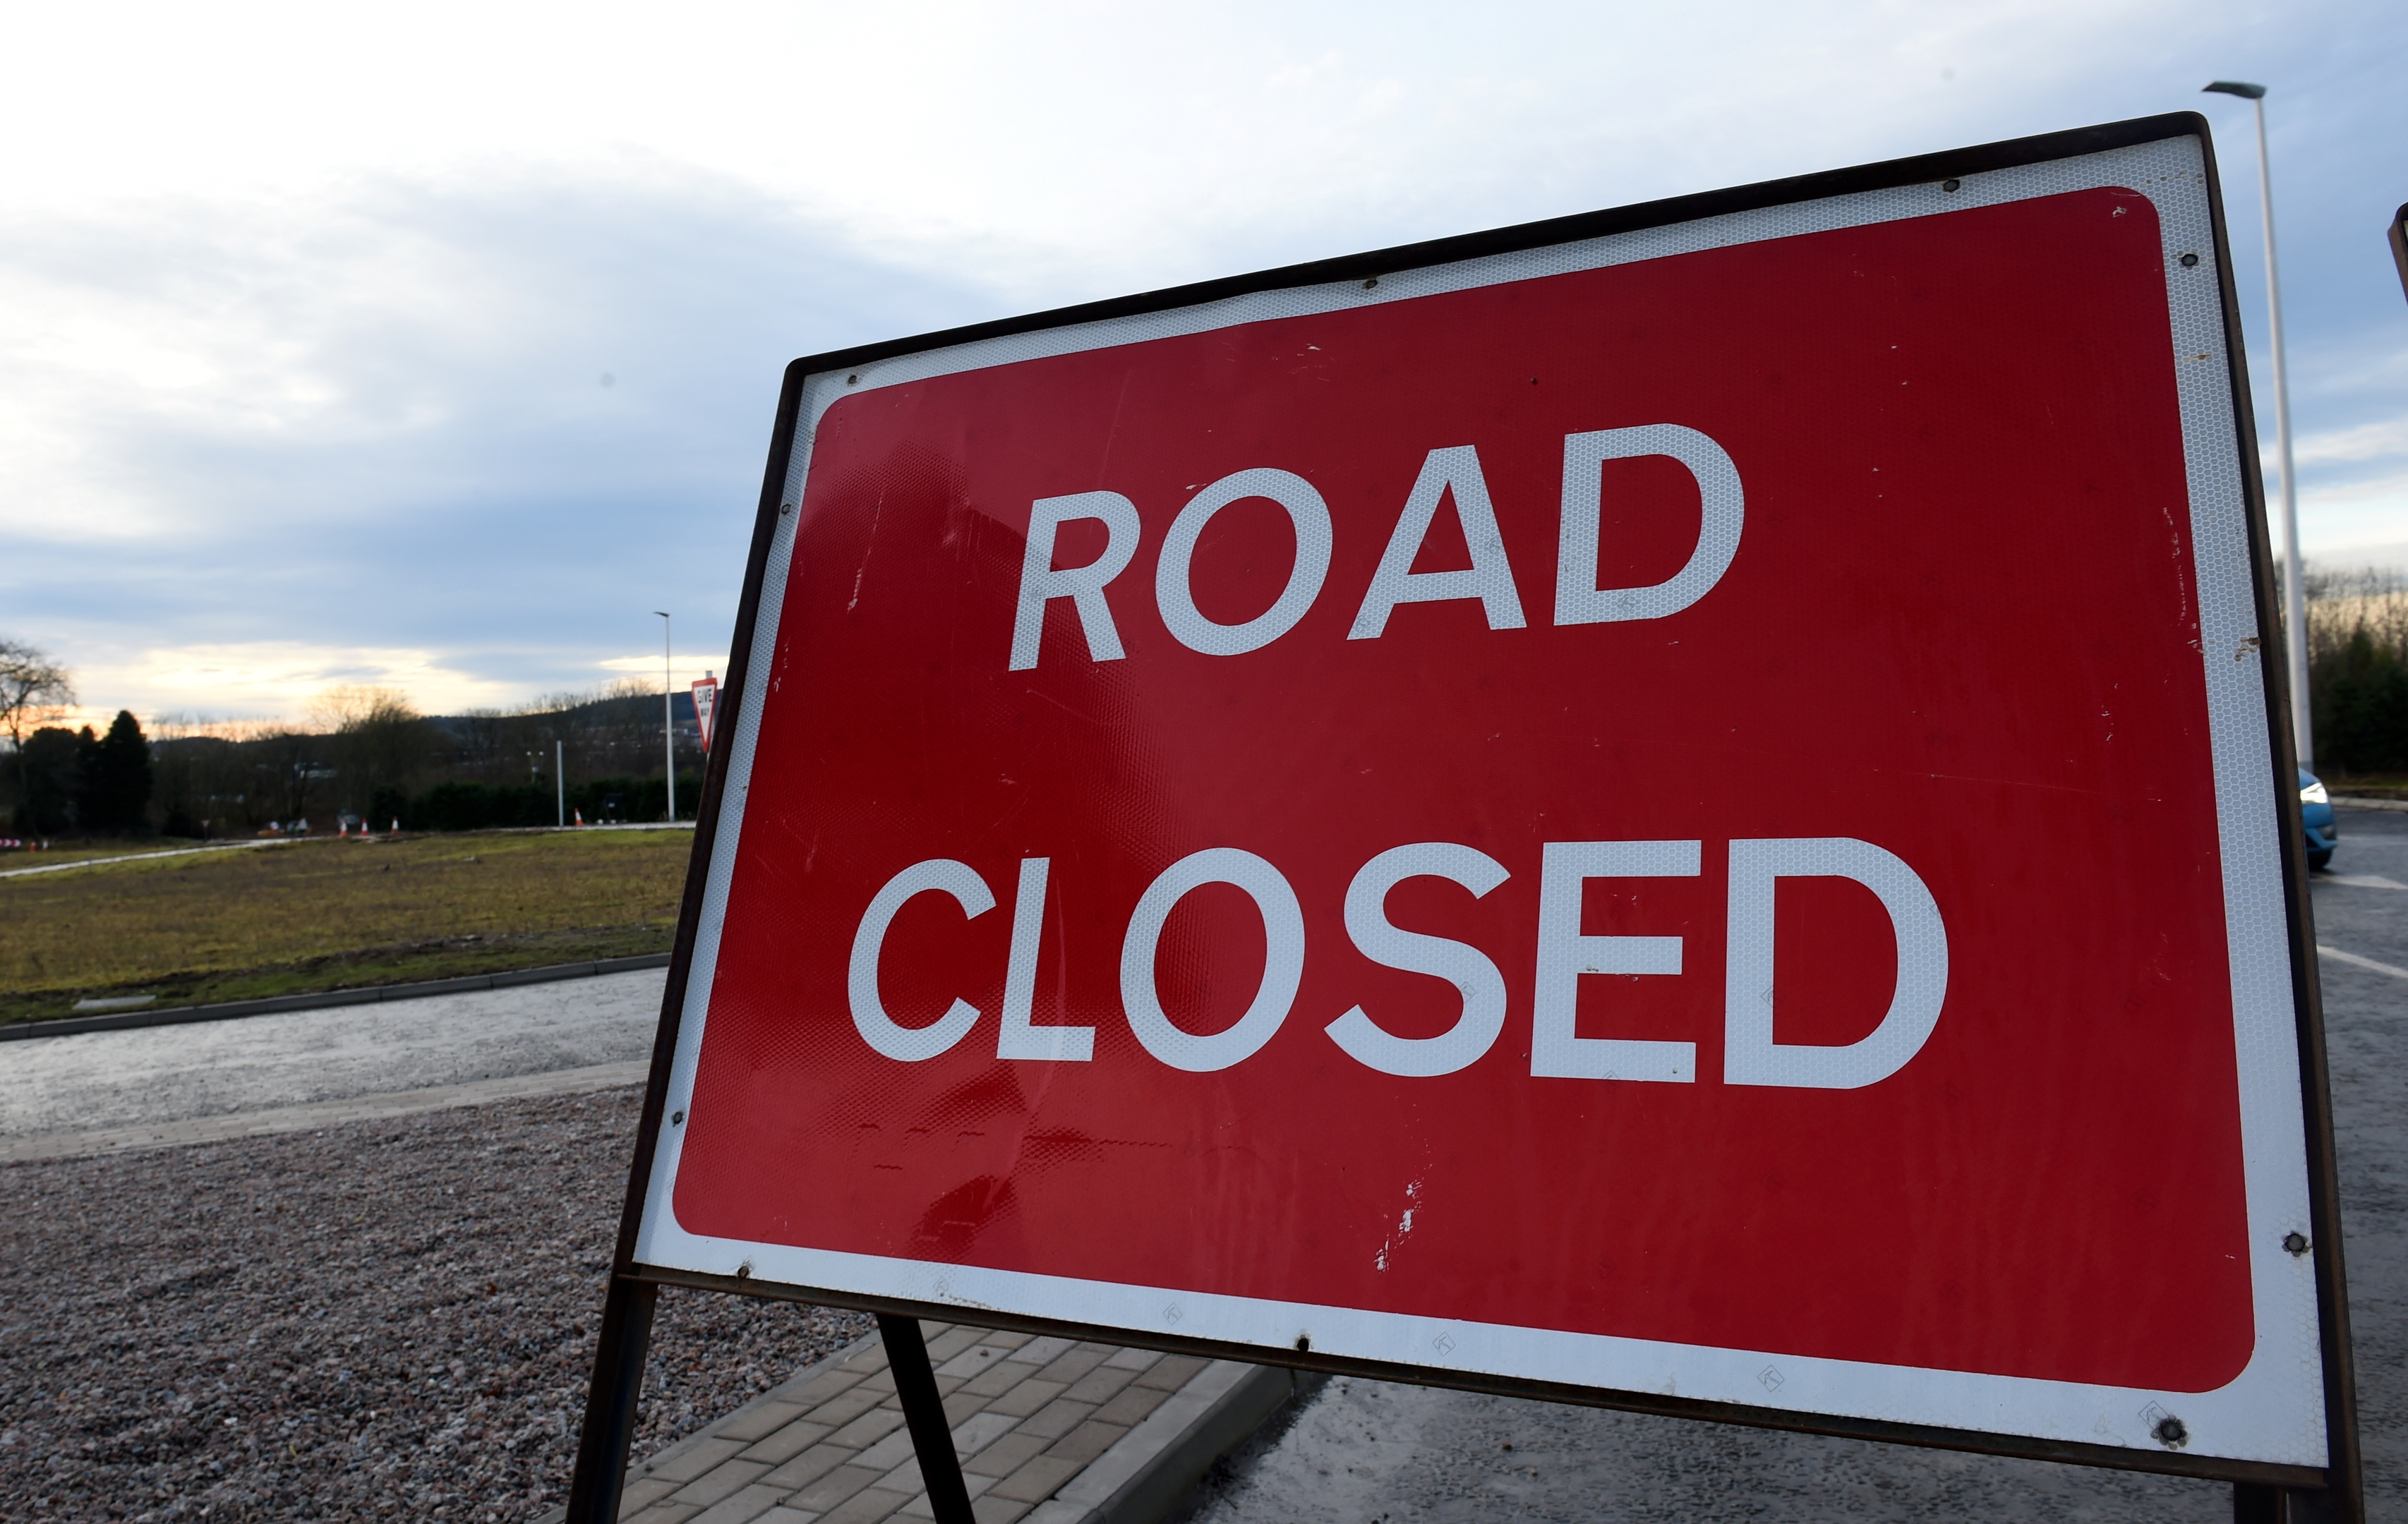 A82 will be closed for several nights for resurfacing at Dochfour.